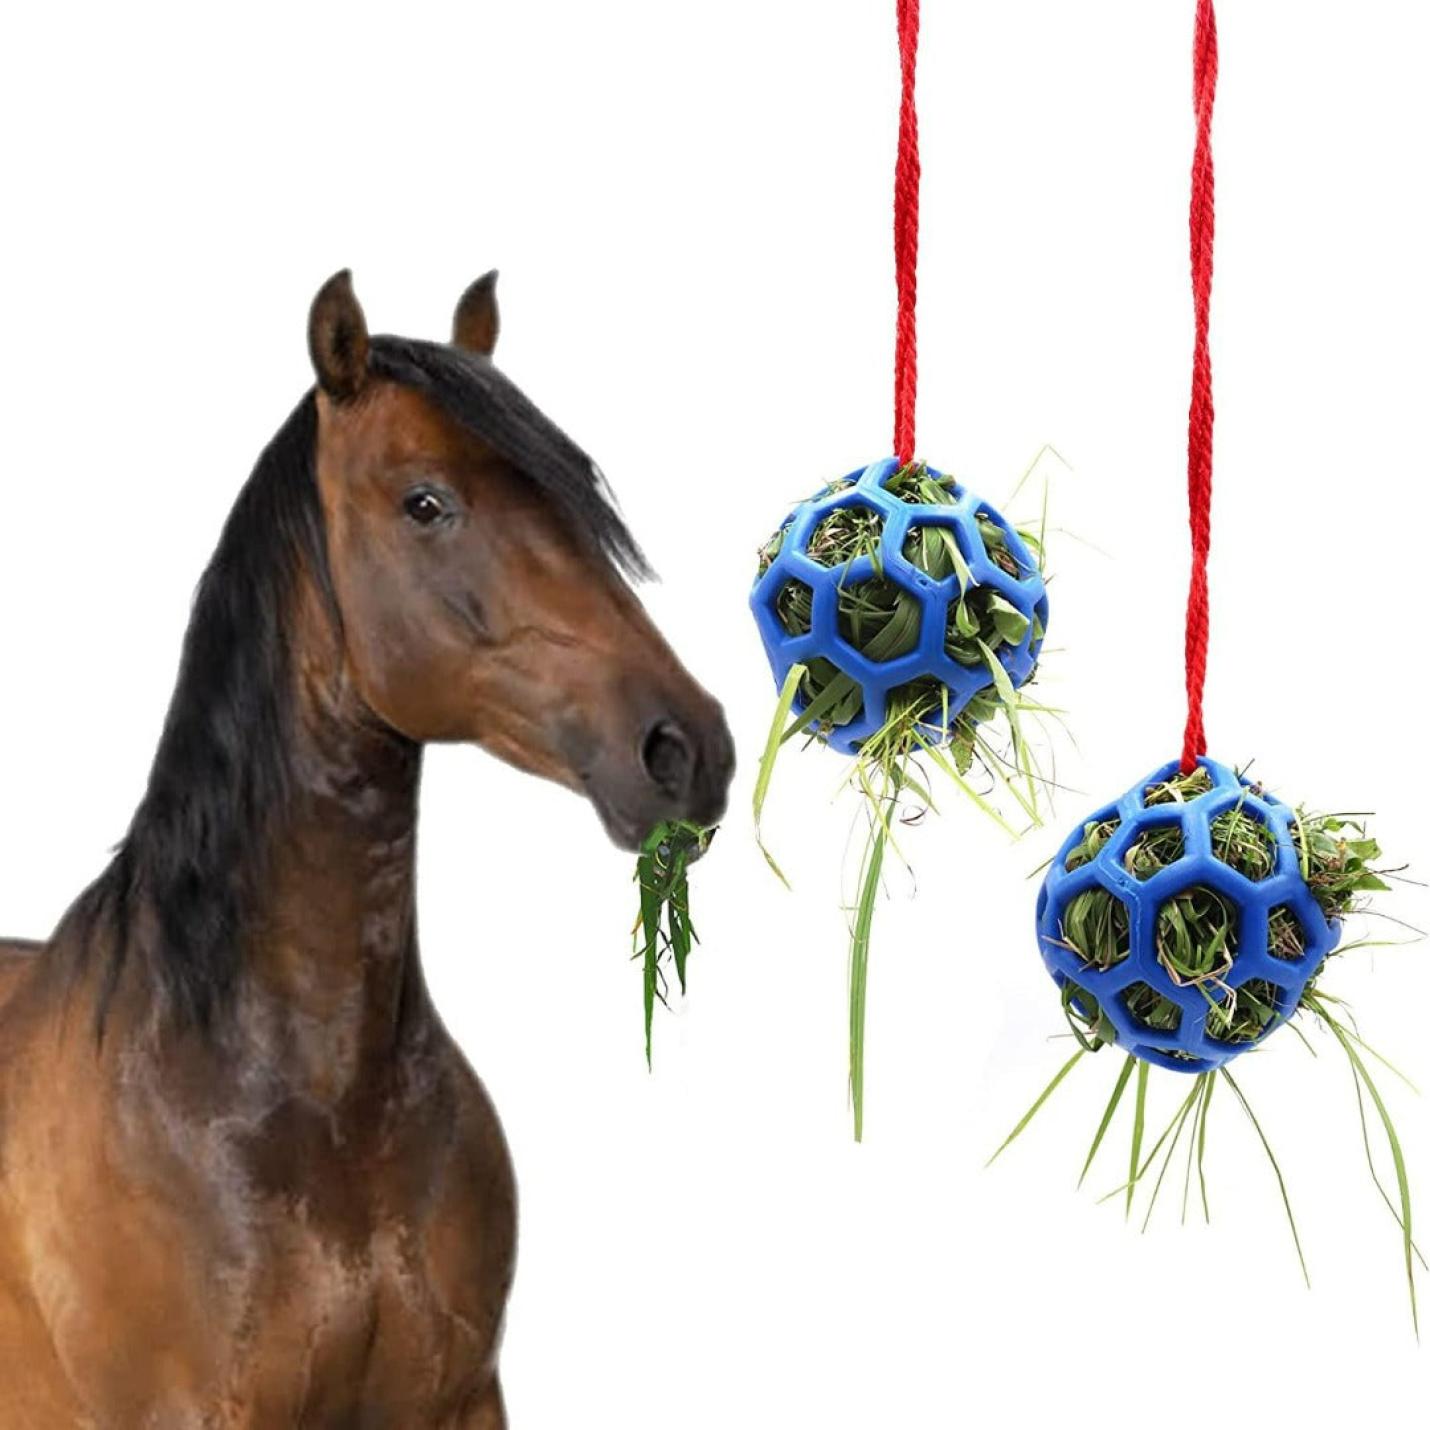 Two horse treat balls for hanging and stress relief